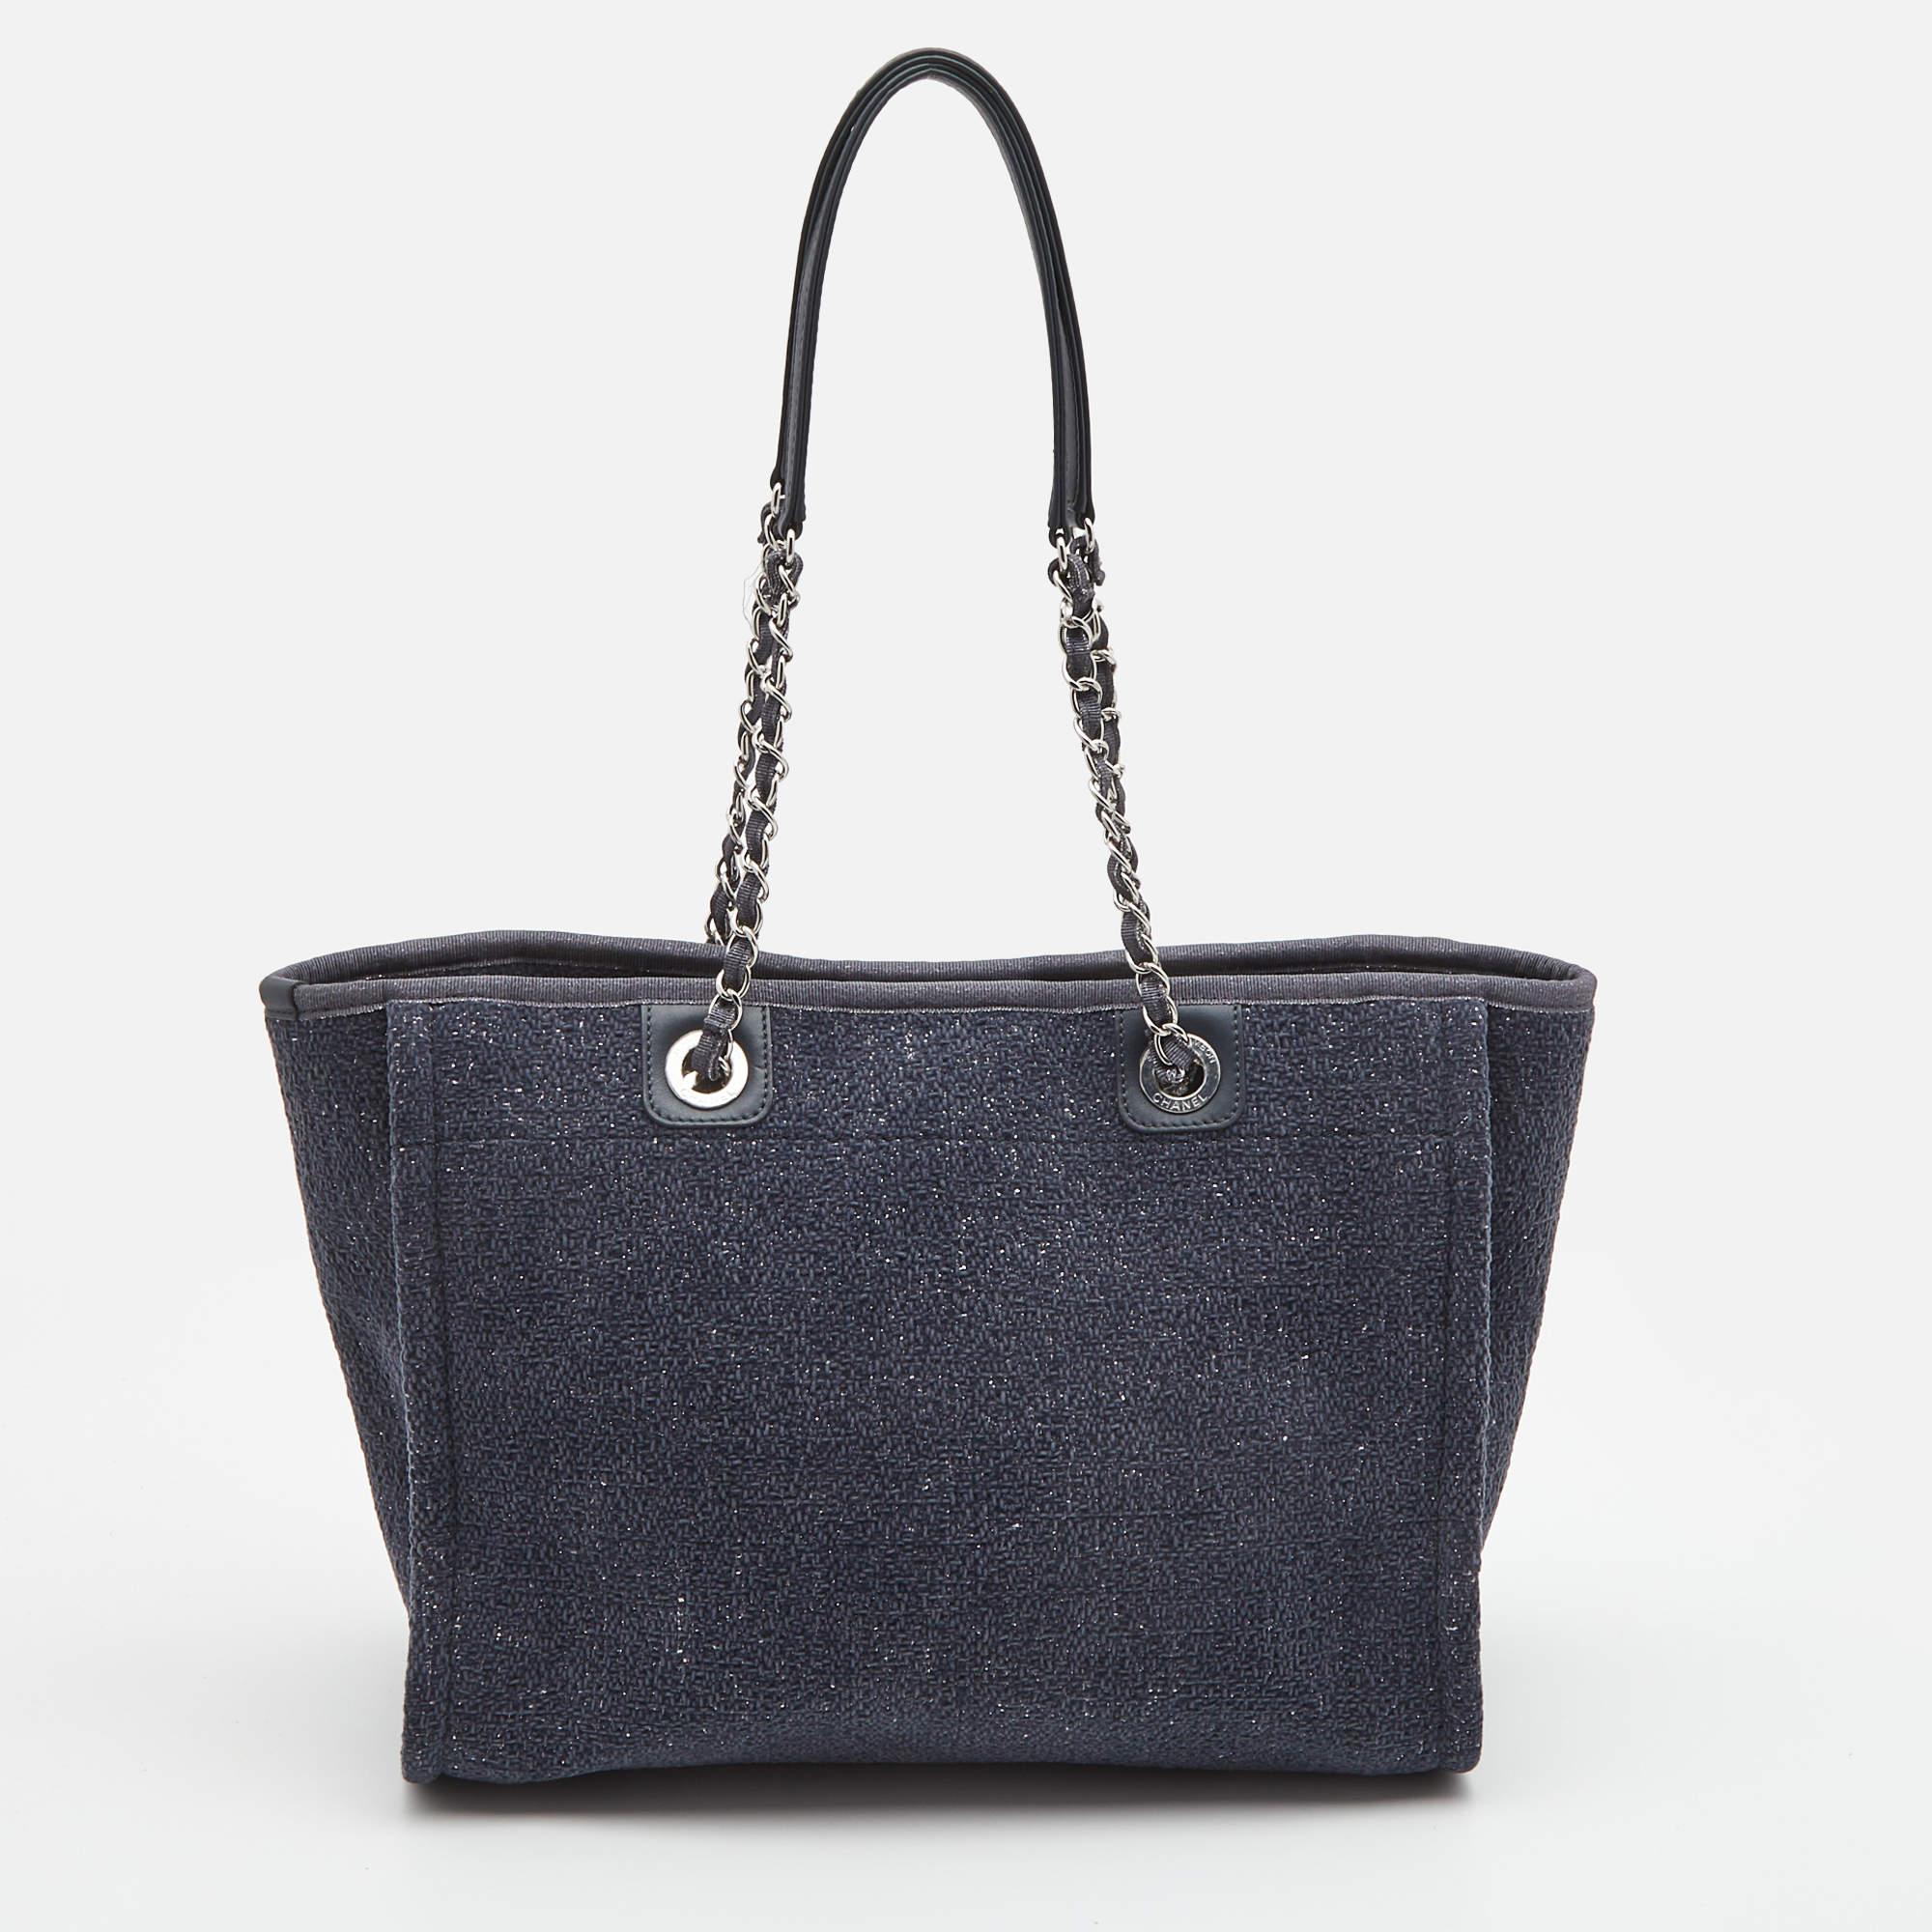 To carry it to the beach or off-duty, this multipurpose bag comes in handy for any casual event. This Chanel Deauville tote bag is crafted in tweed in a versatile navy blue hue. This bag features a large slip pocket with wall pockets and magnetic